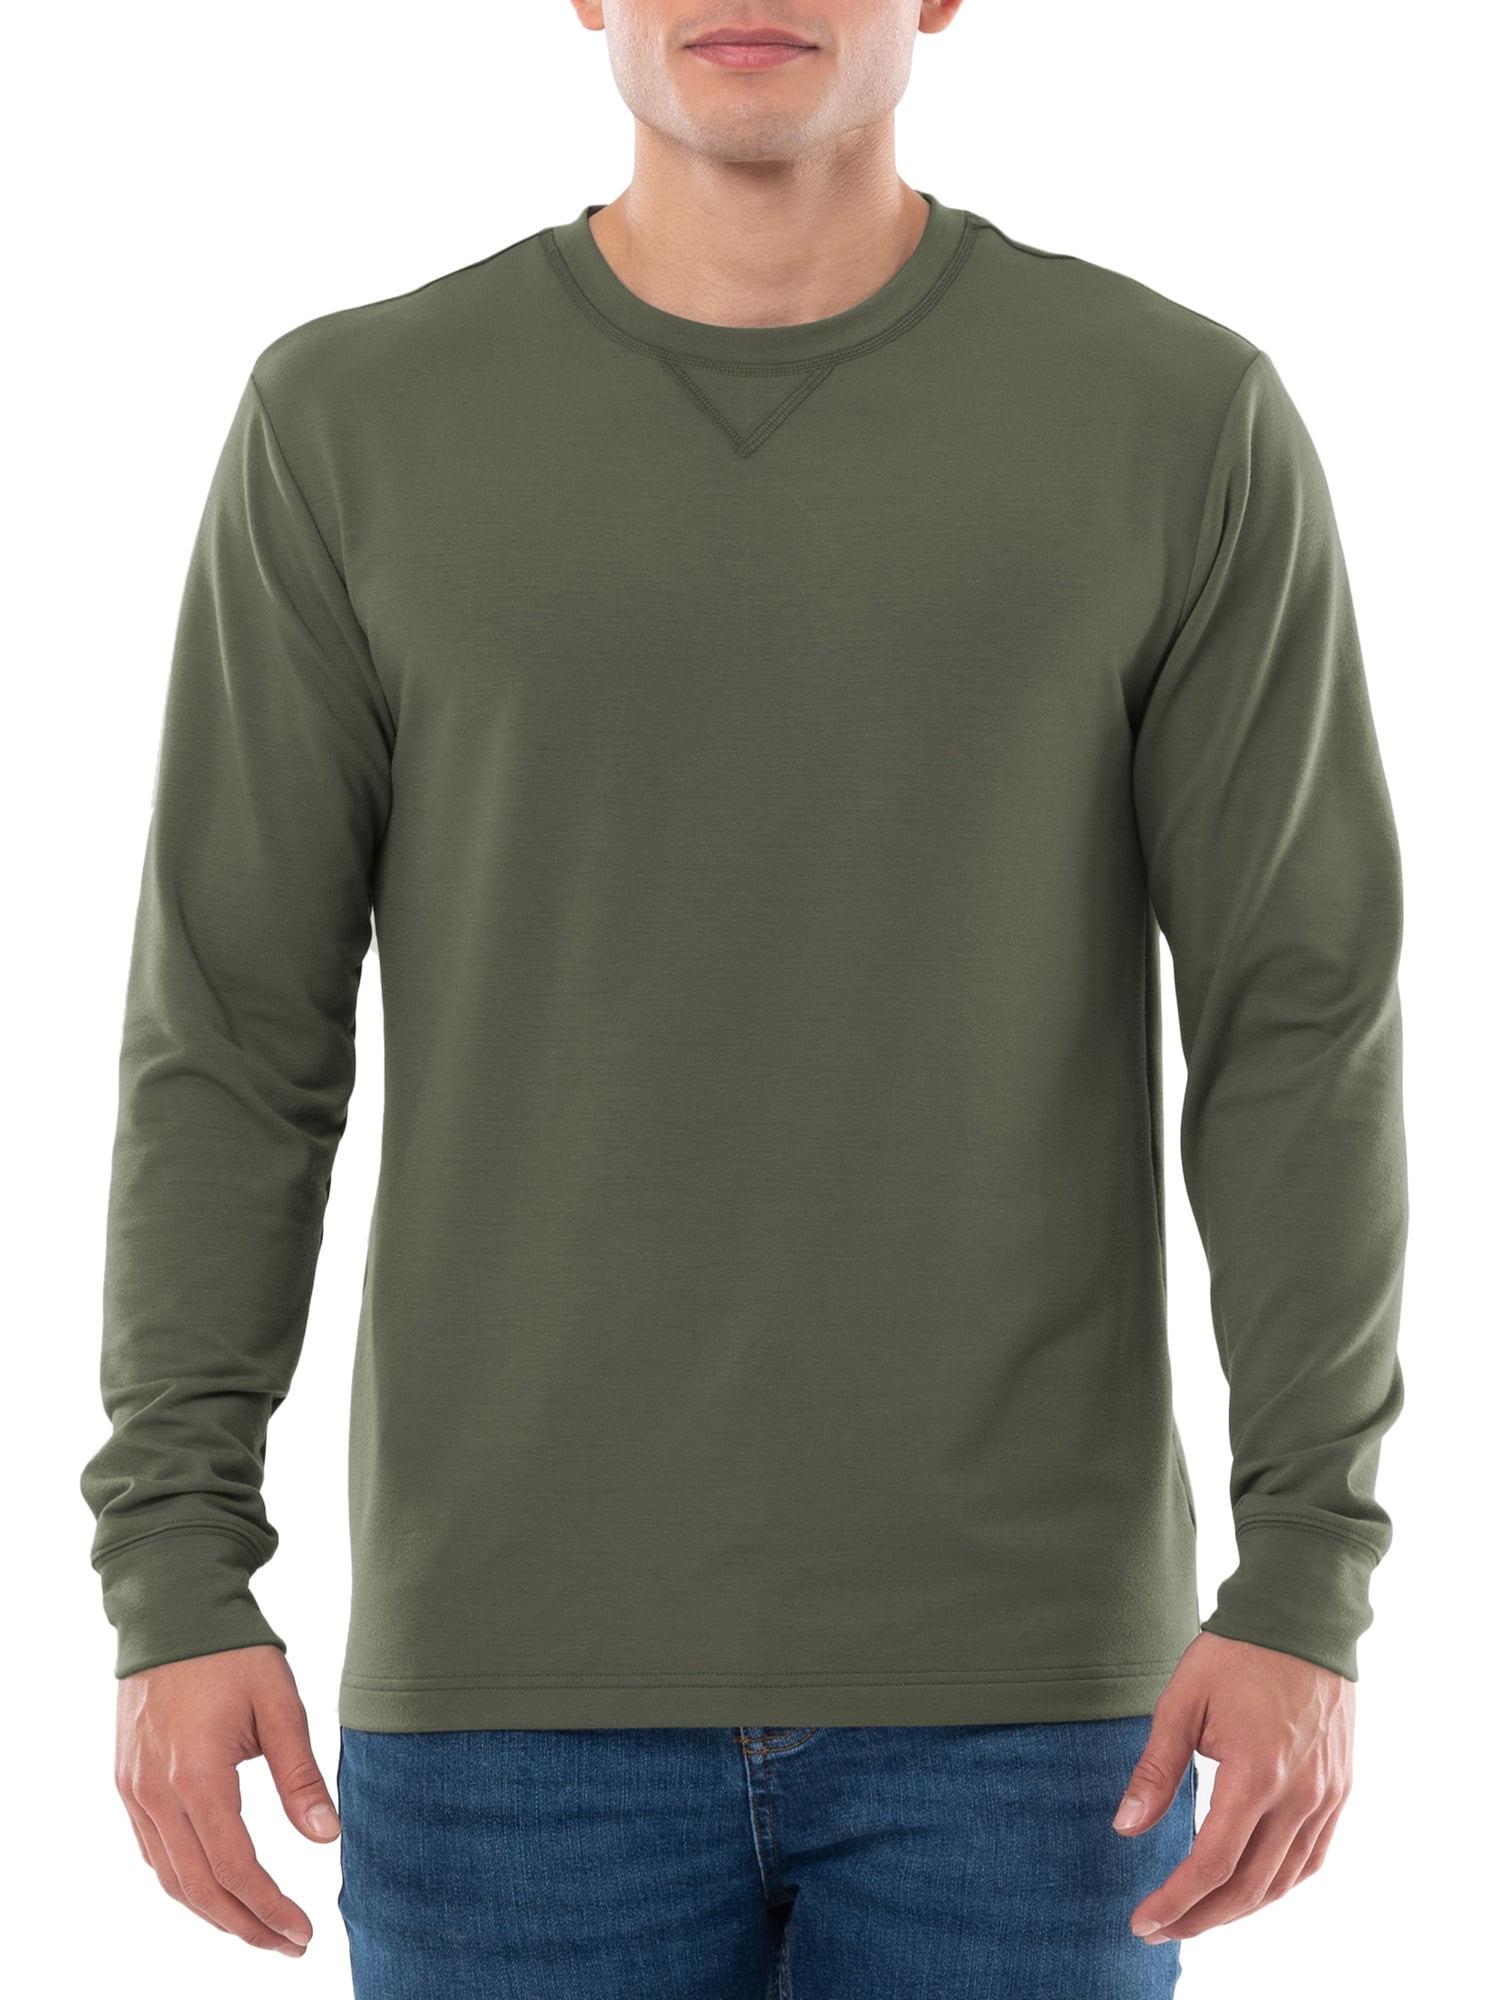 George Men's French Terry Long Sleeve Crew T-shirt, Sizes XS-5XL